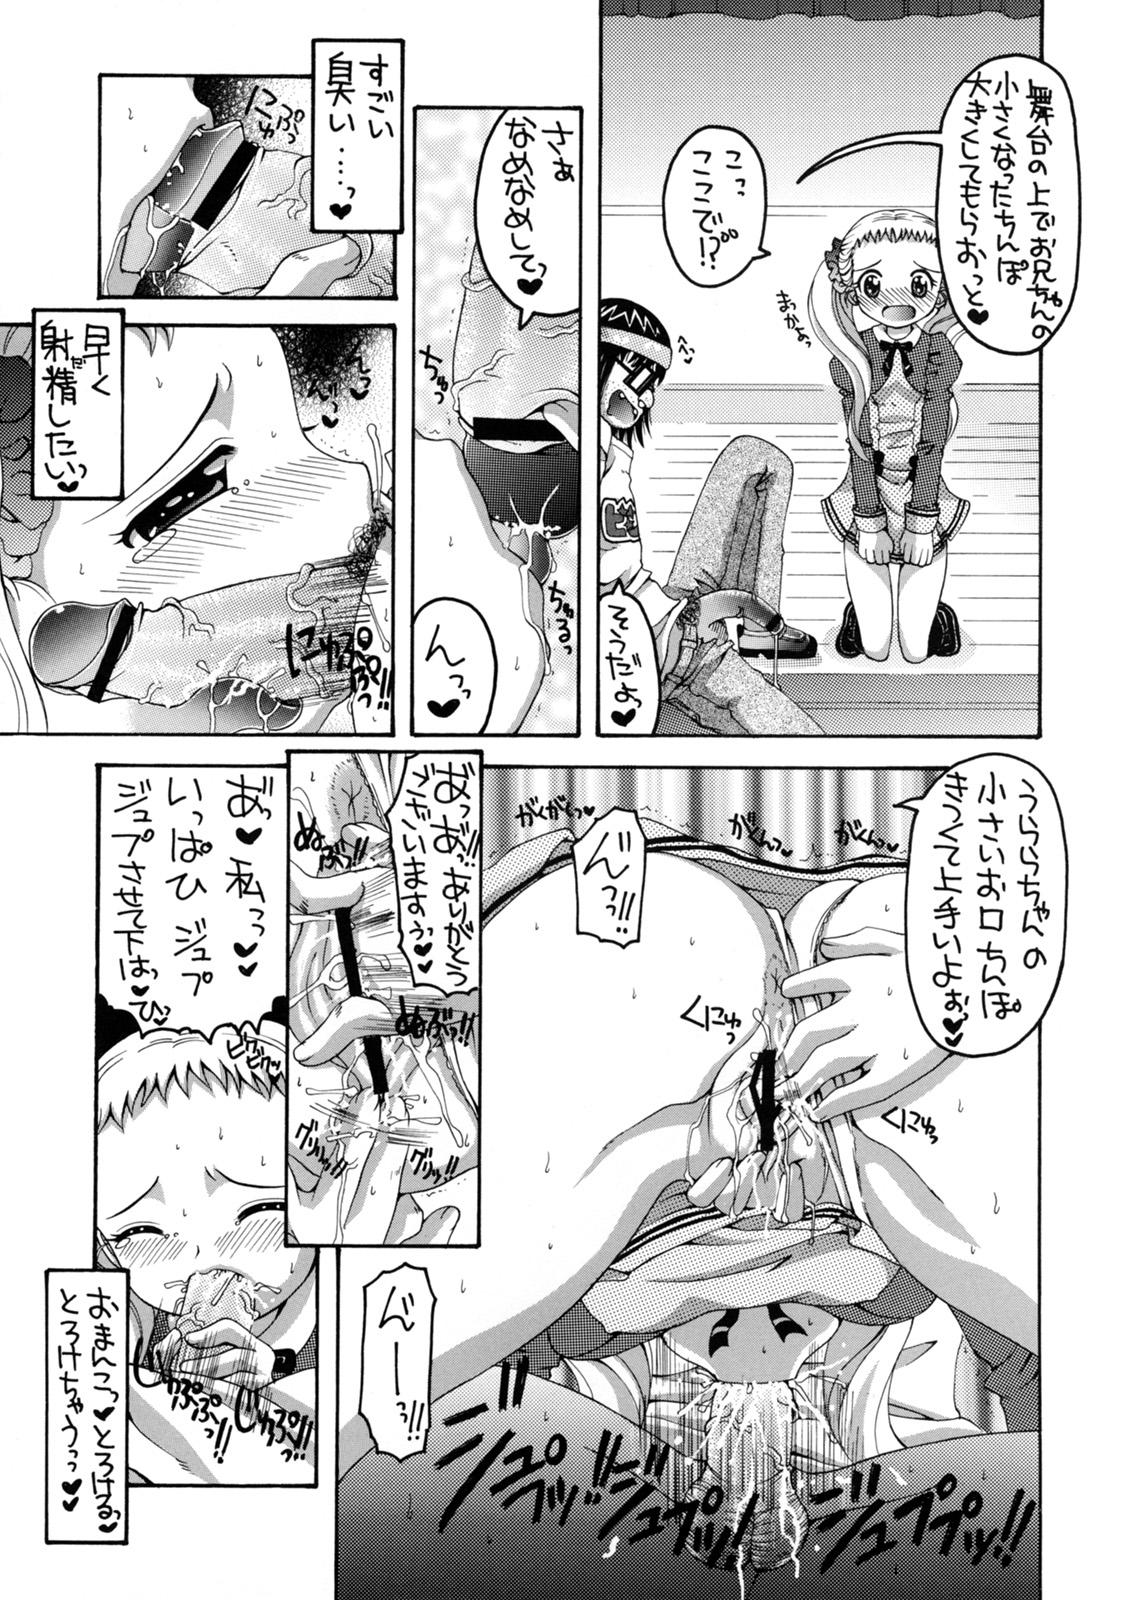 Chaturbate Yes! Five 3 - Pretty cure Yes precure 5 Master - Page 6